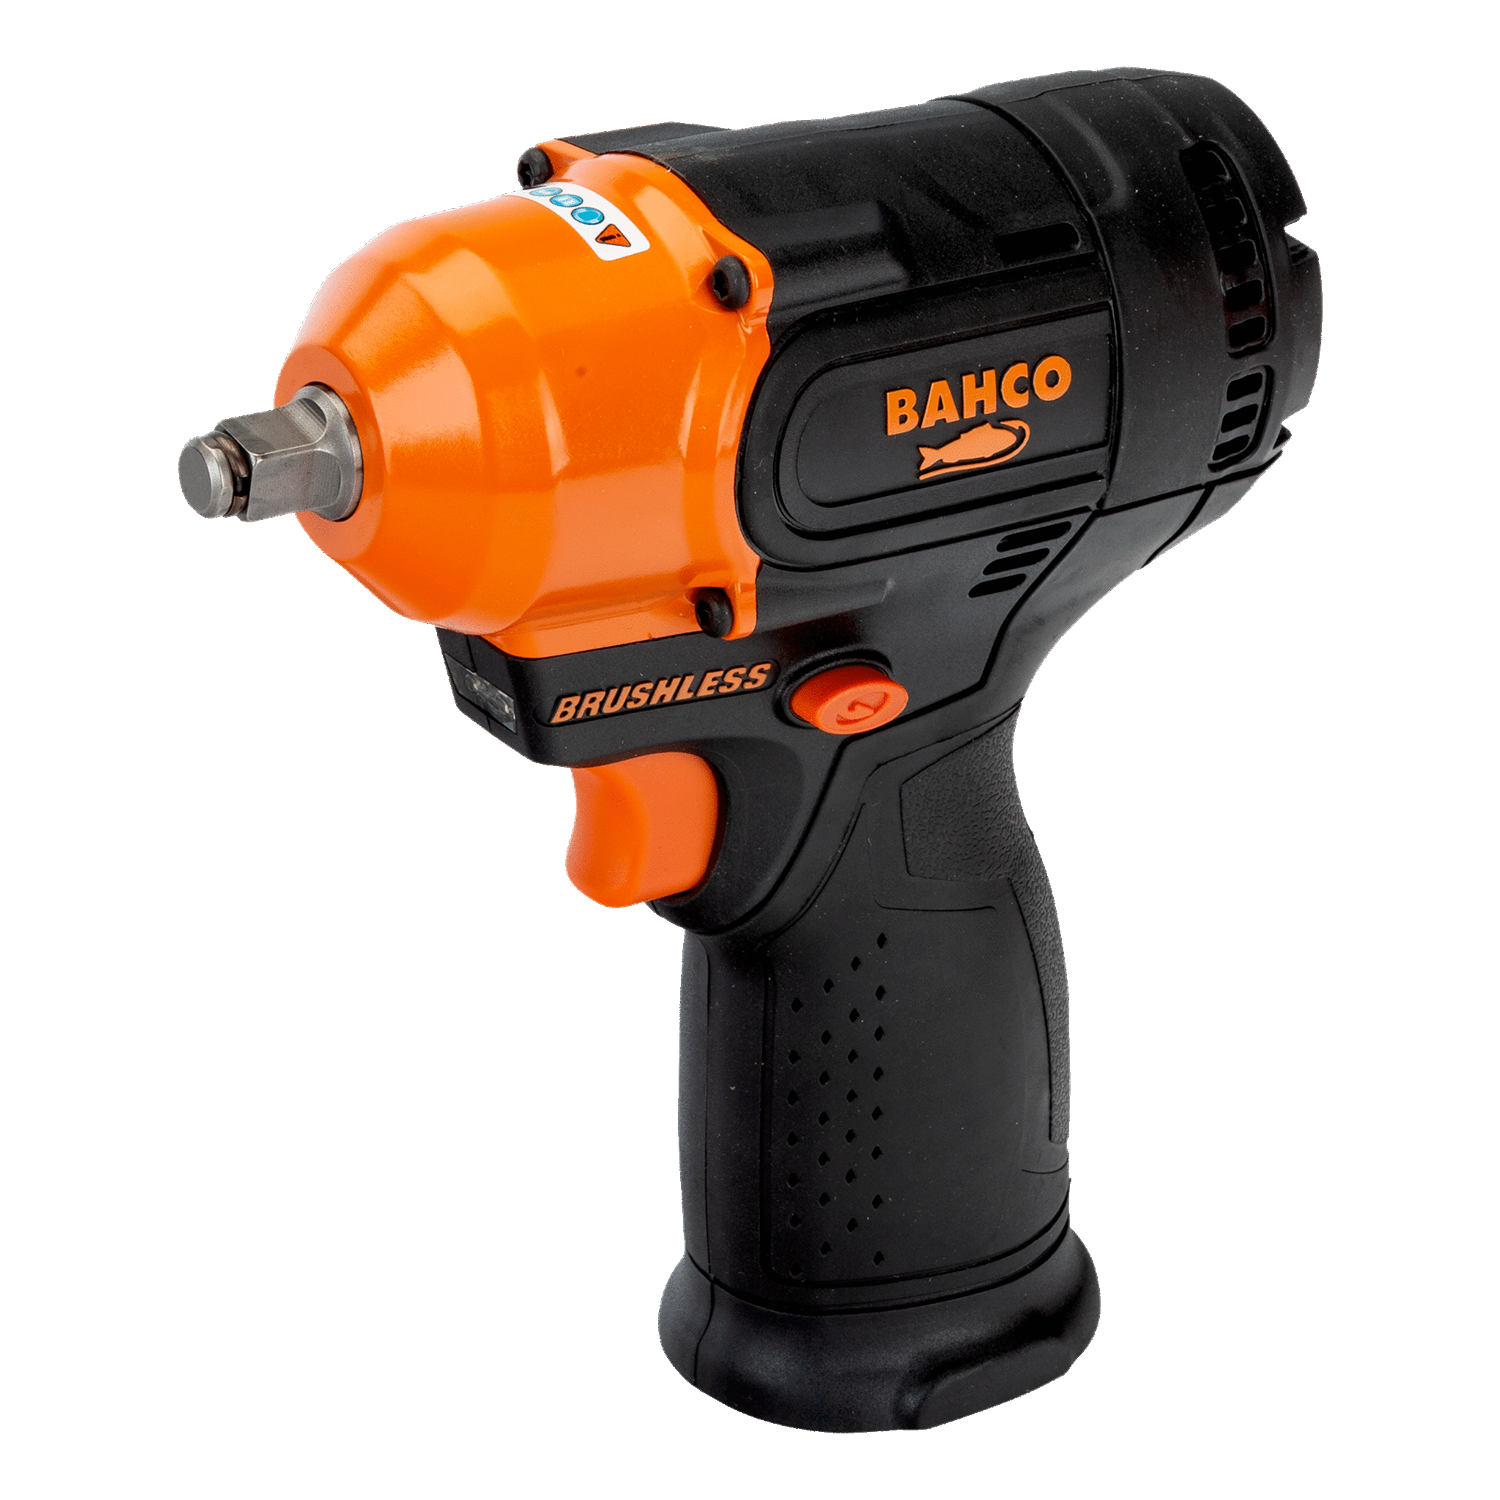 BAHCO BCL32IW1 14.4 V 3/8” Cordless Brushless Impact Wrench - Premium Impact Wrench from BAHCO - Shop now at Yew Aik.